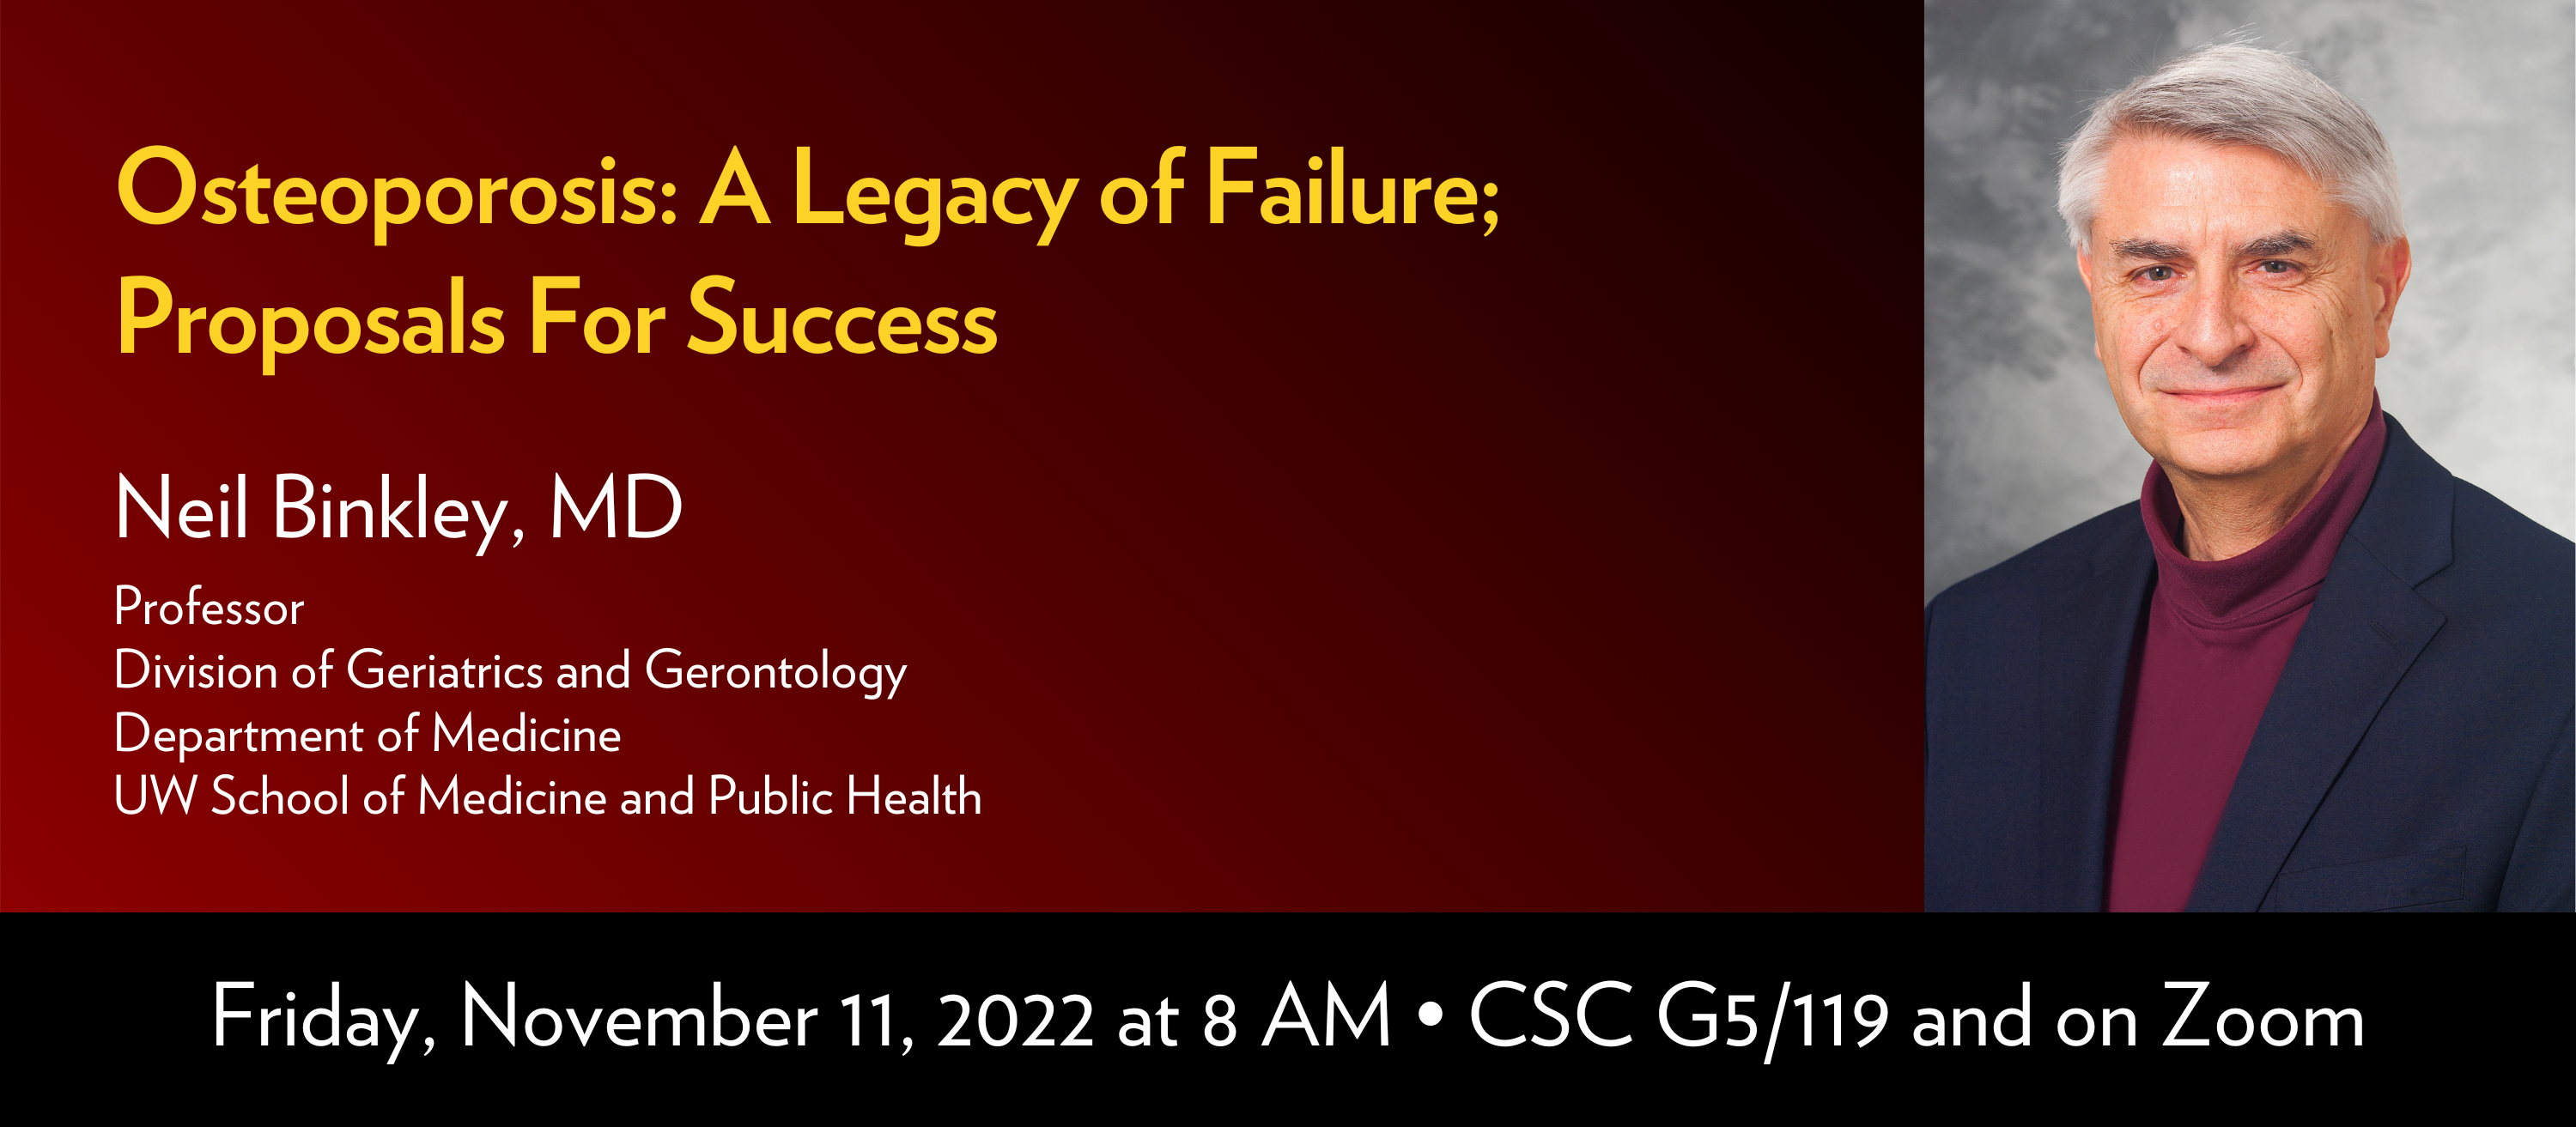 Title: Osteoporosis: A Legacy of Failure Proposals For Success